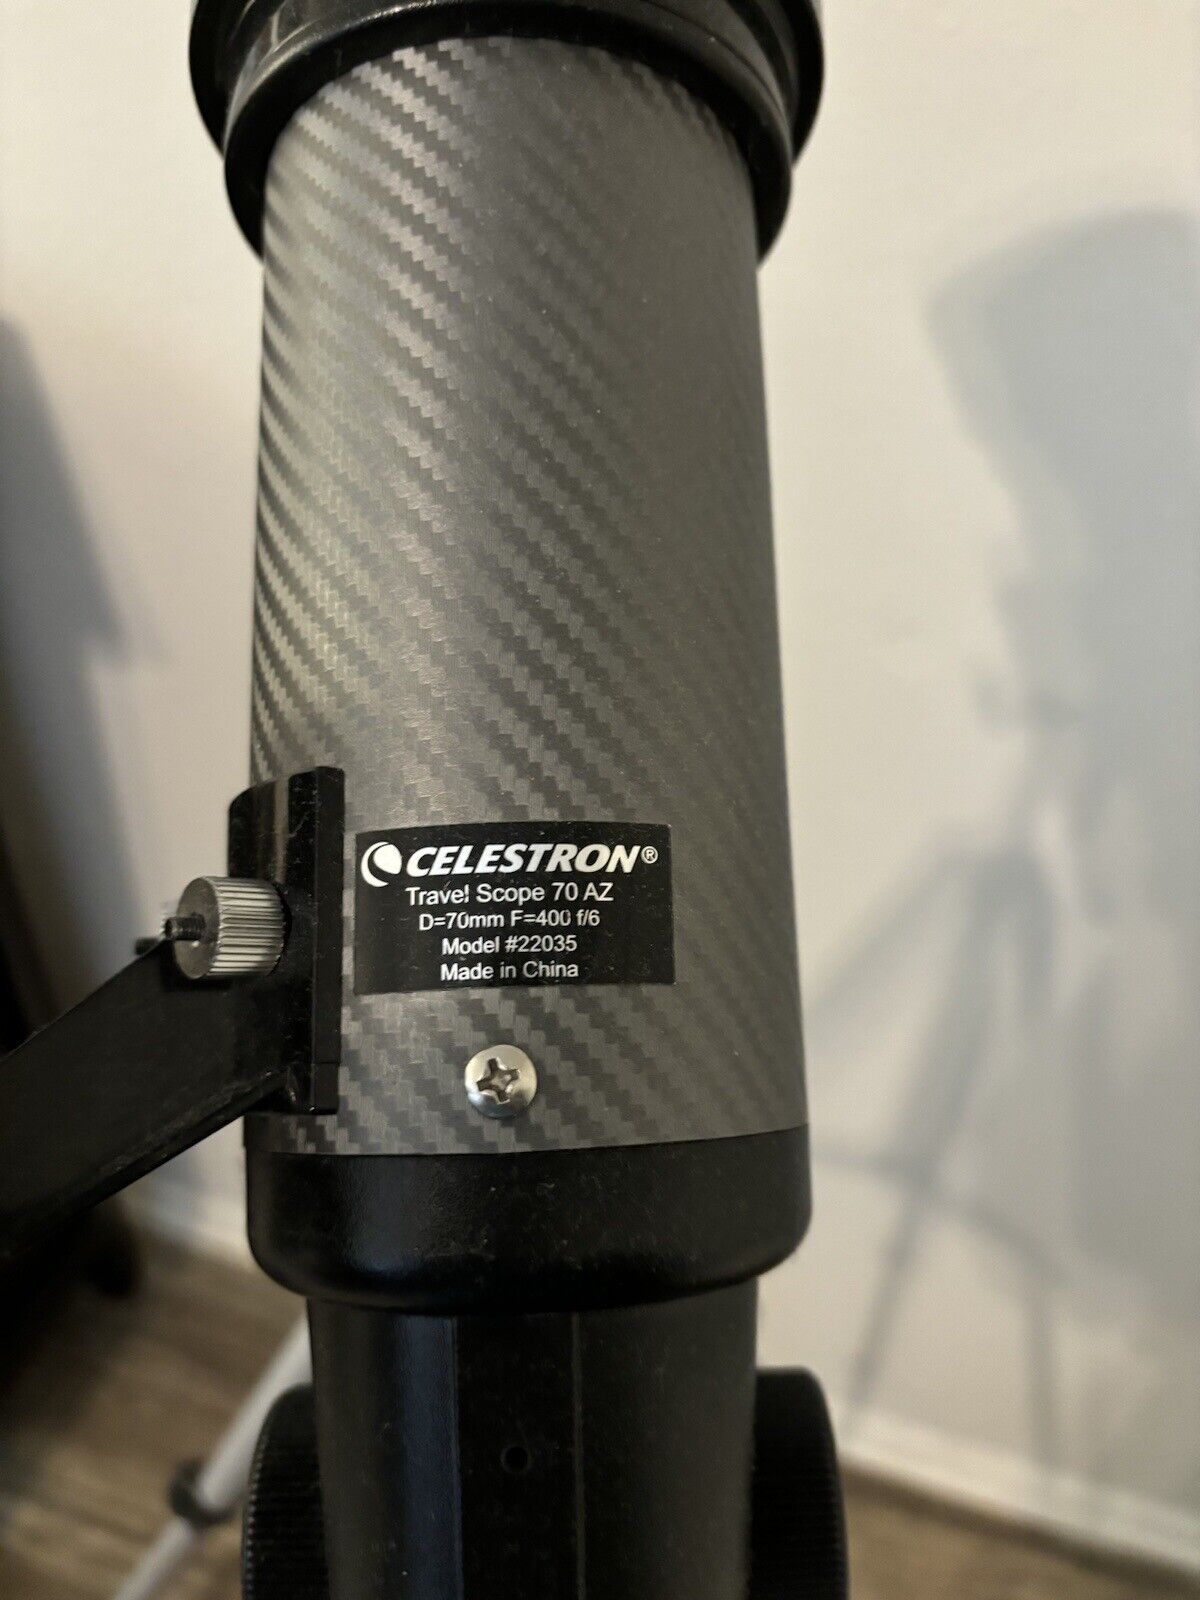 Celestron Travel Scope 70 DX Portable Refractor Telescope With Backpack